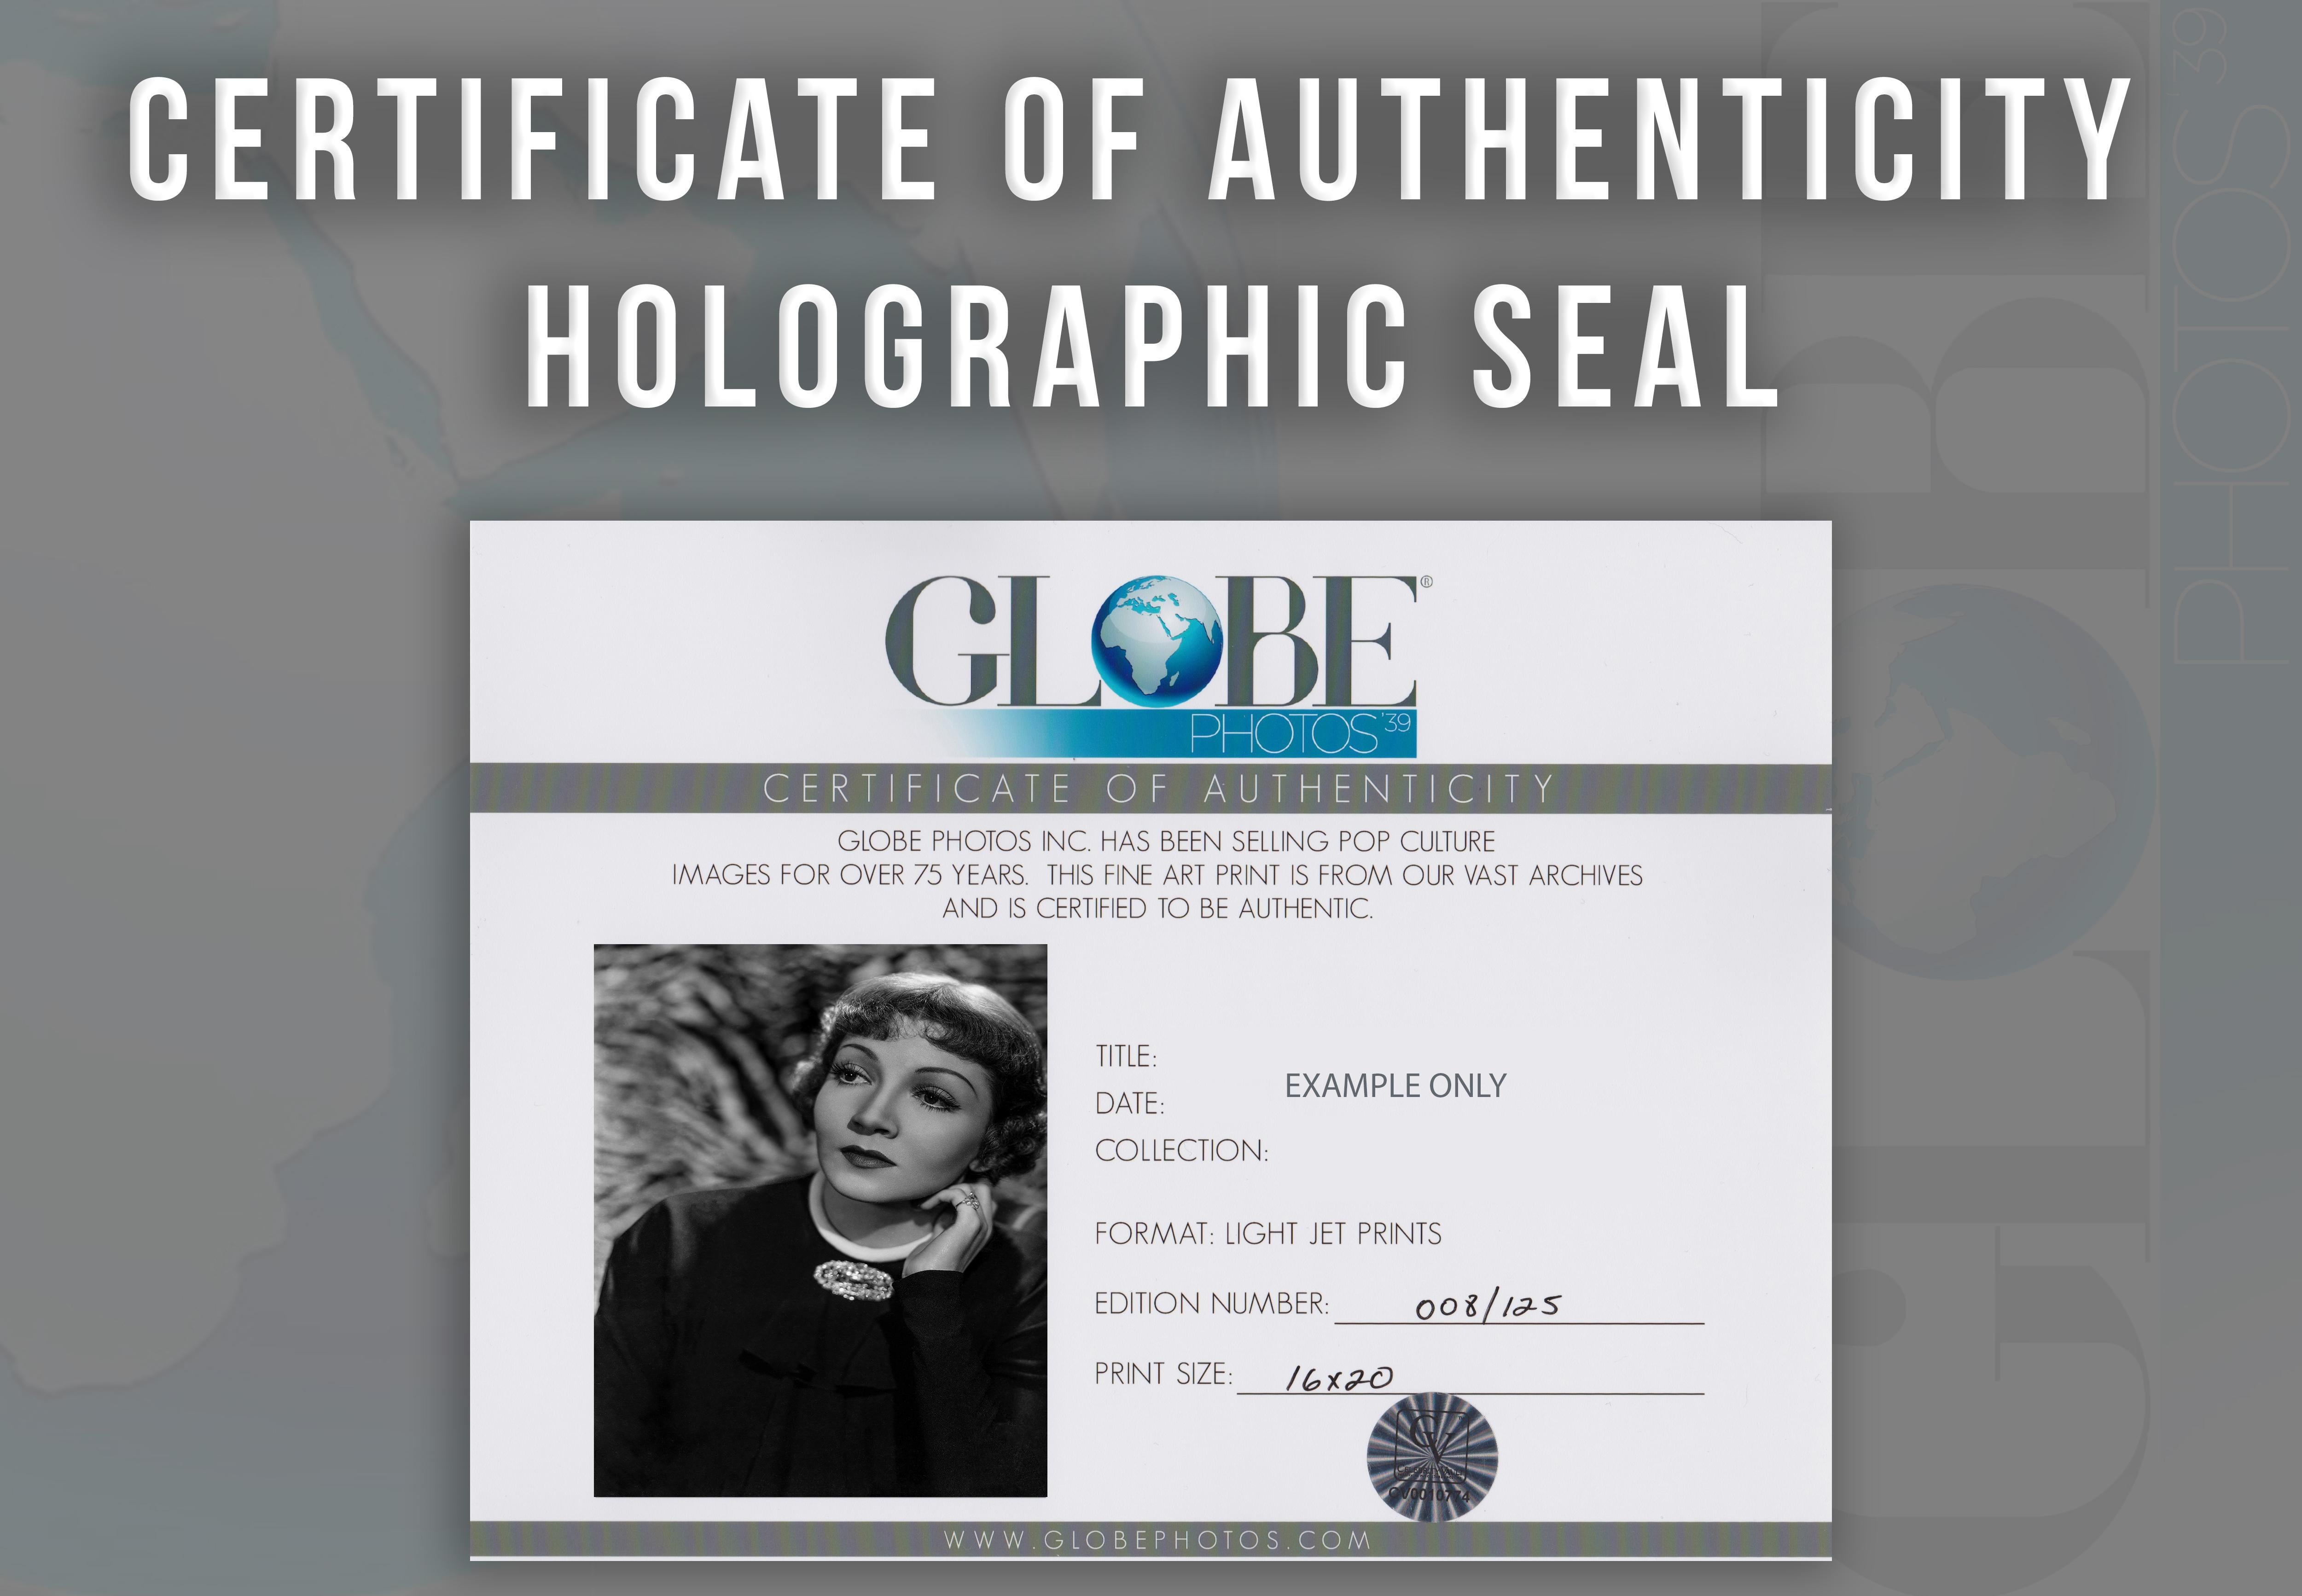 This black and white portrait features American film actress and a leading lady in Hollywood for over two decades, Claudette Colbert. Colbert is featured here posed deep in thought.

This image is credited to Globe Photos.

This is a limited edition